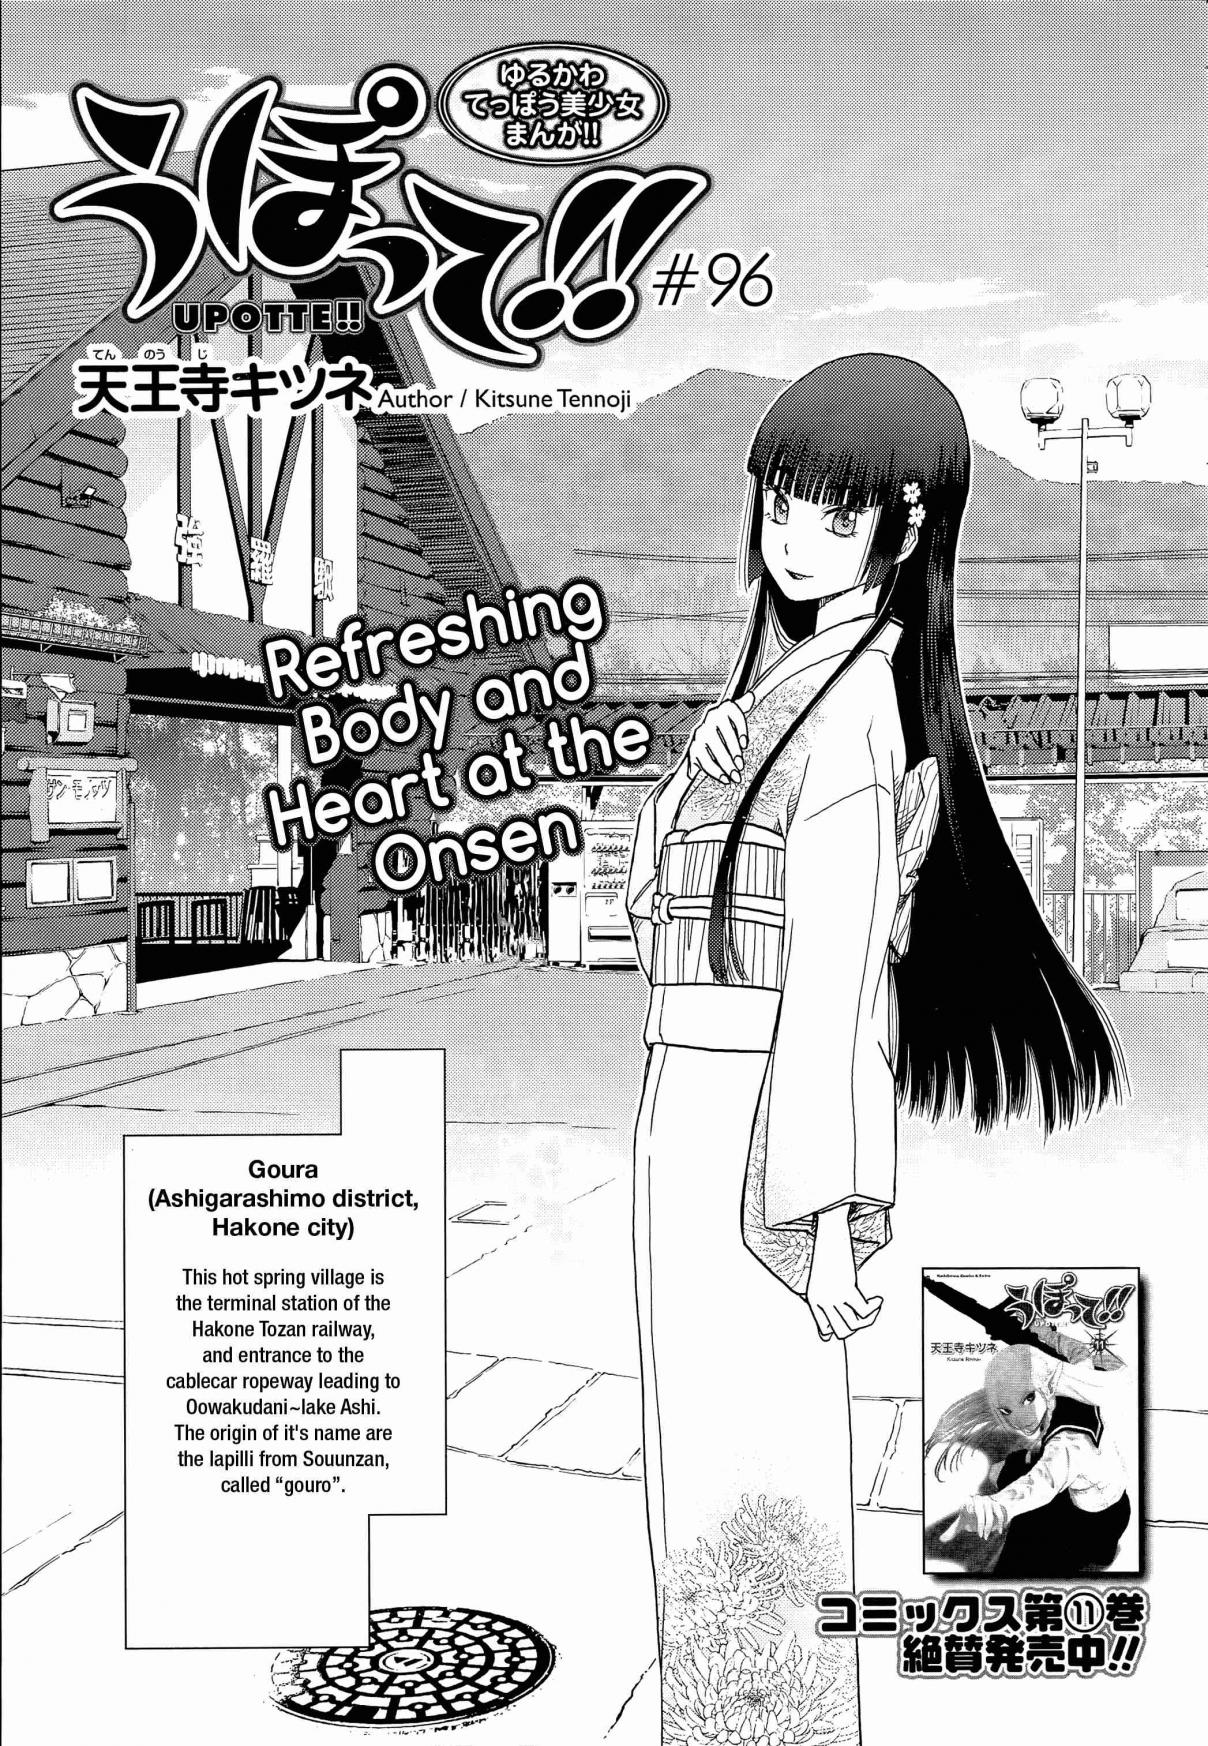 Upotte!! Vol. 12 Ch. 98 Refreshing Body and Heart at the Onsen